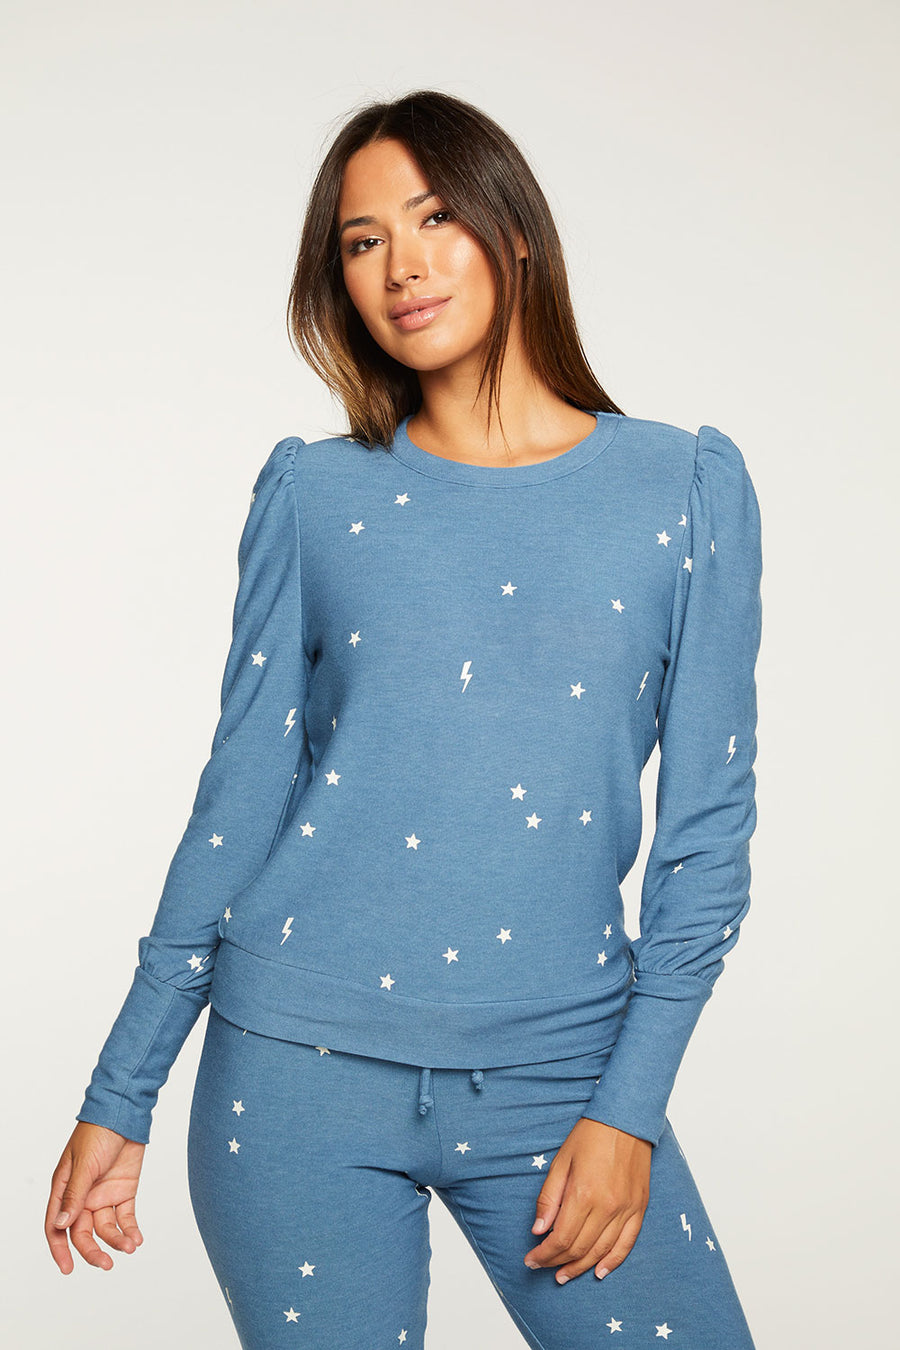 Starry Bolts WOMENS - chaserbrand